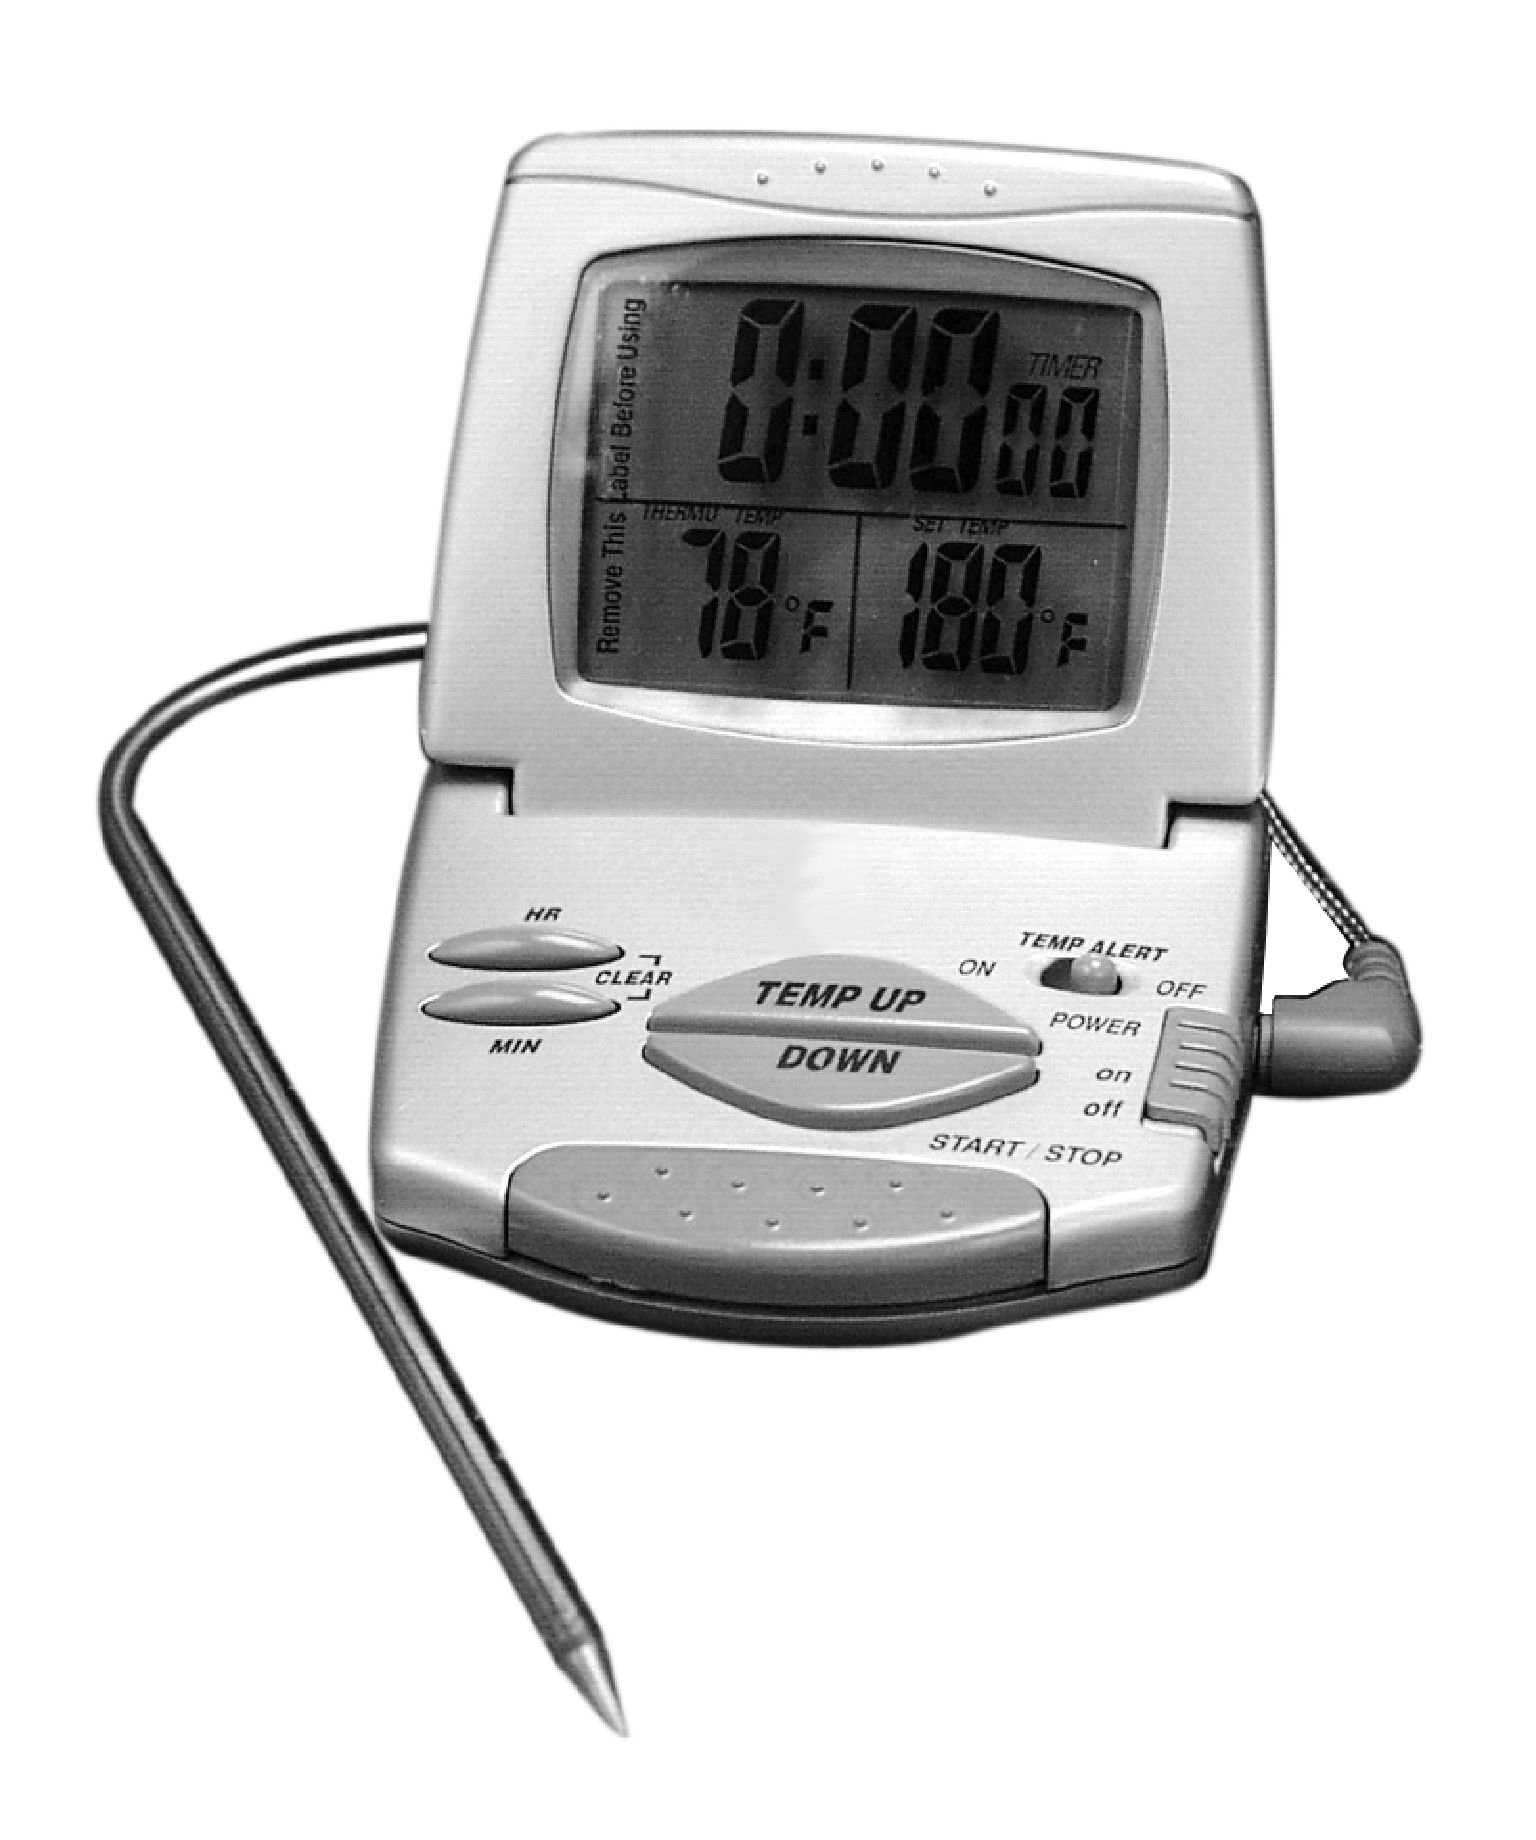 Taylor Digital Cooking Thermometer & Timer